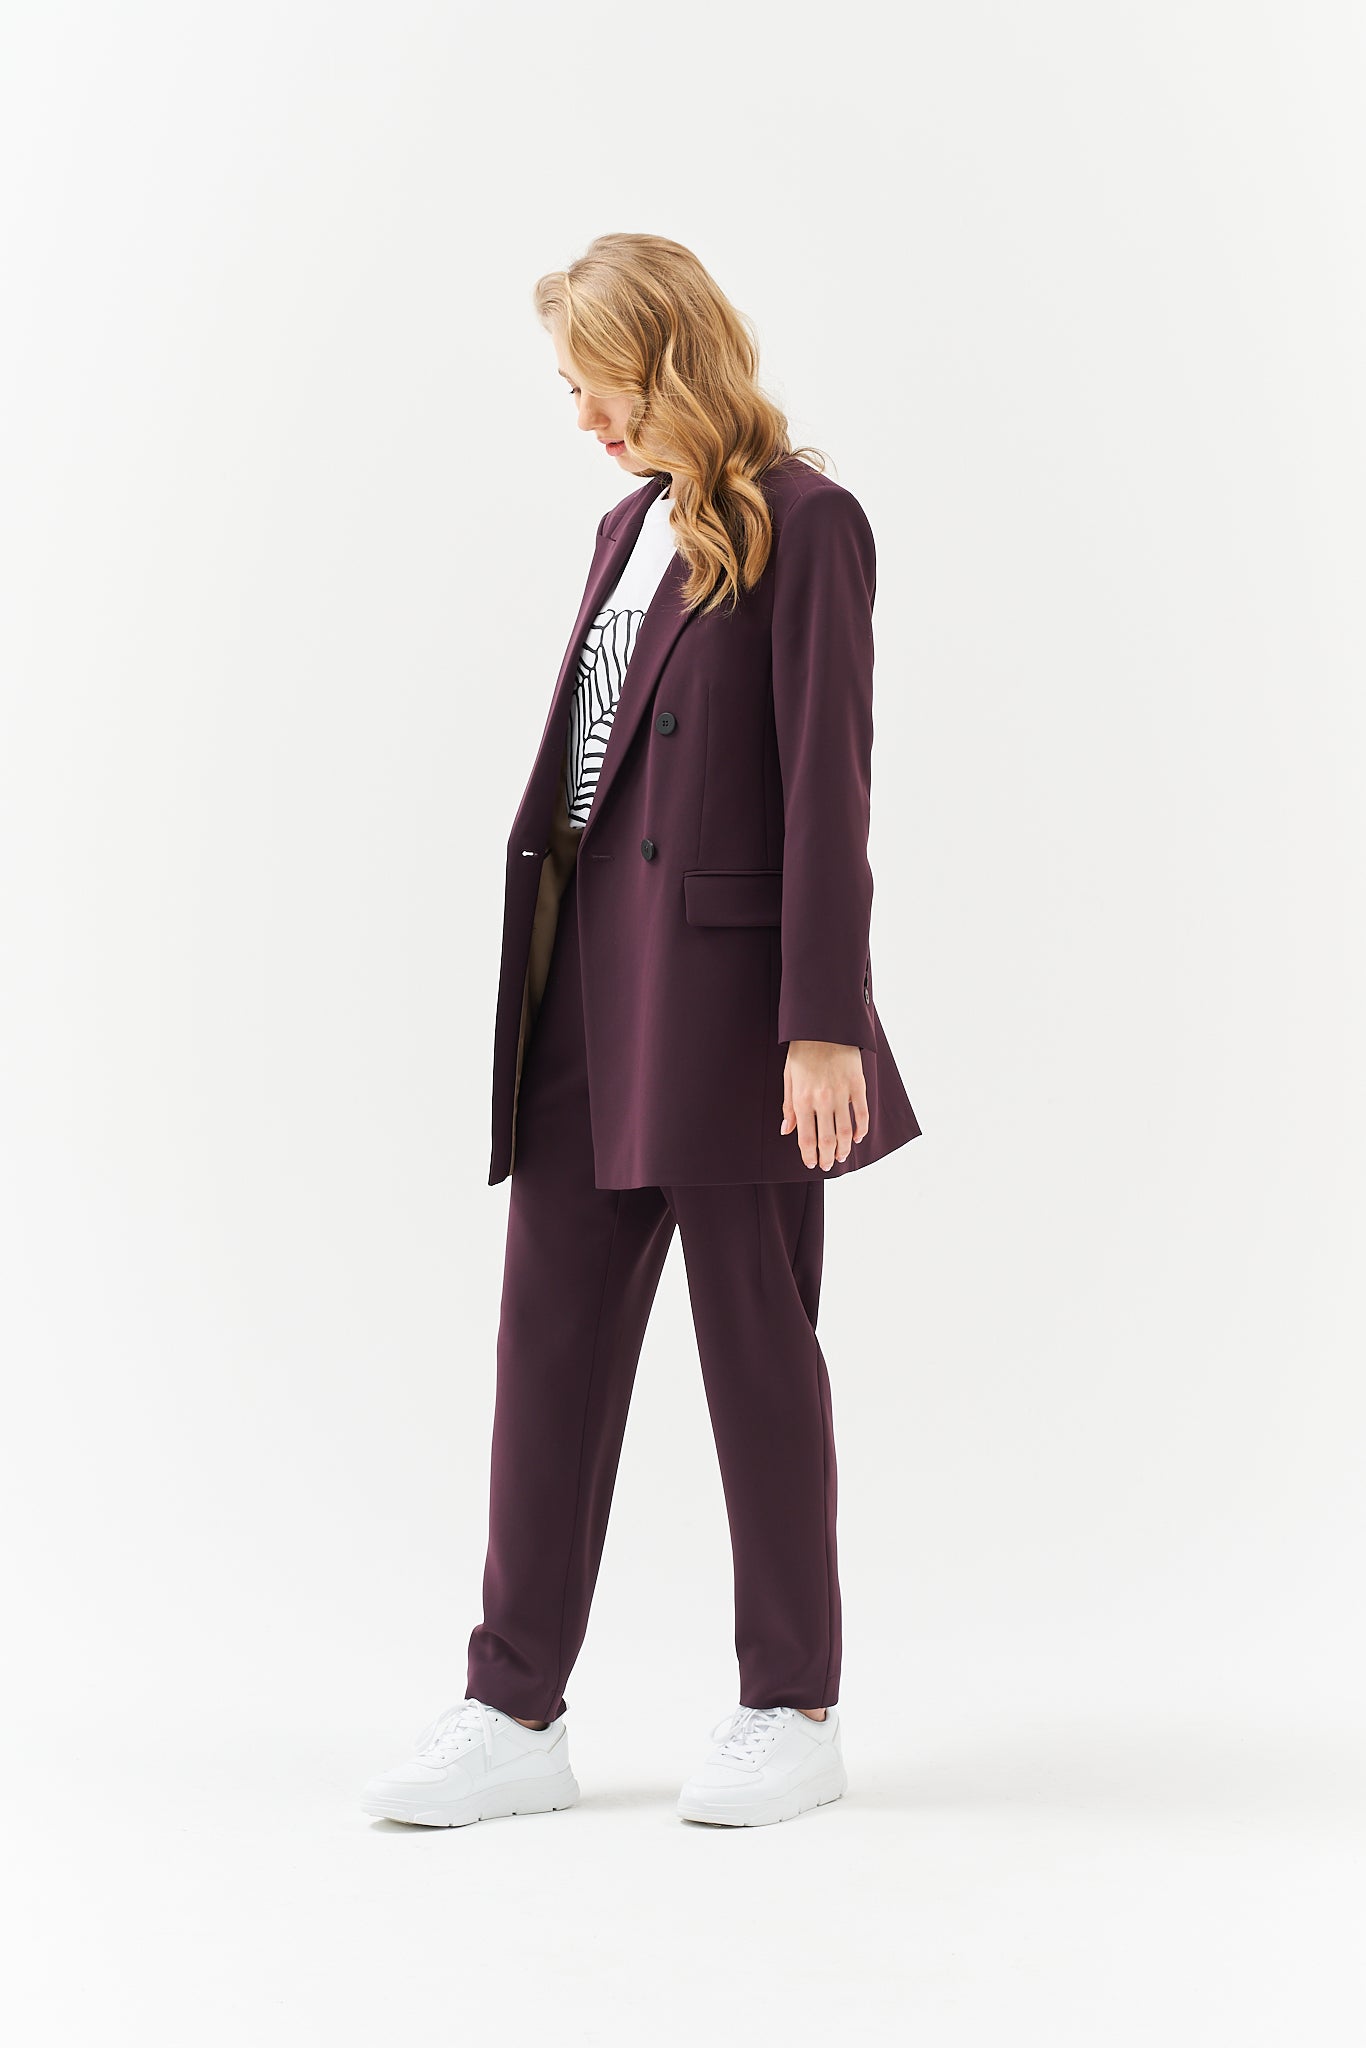 LONG DOUBLE BREASTED BLAZER IN BURGUNDY